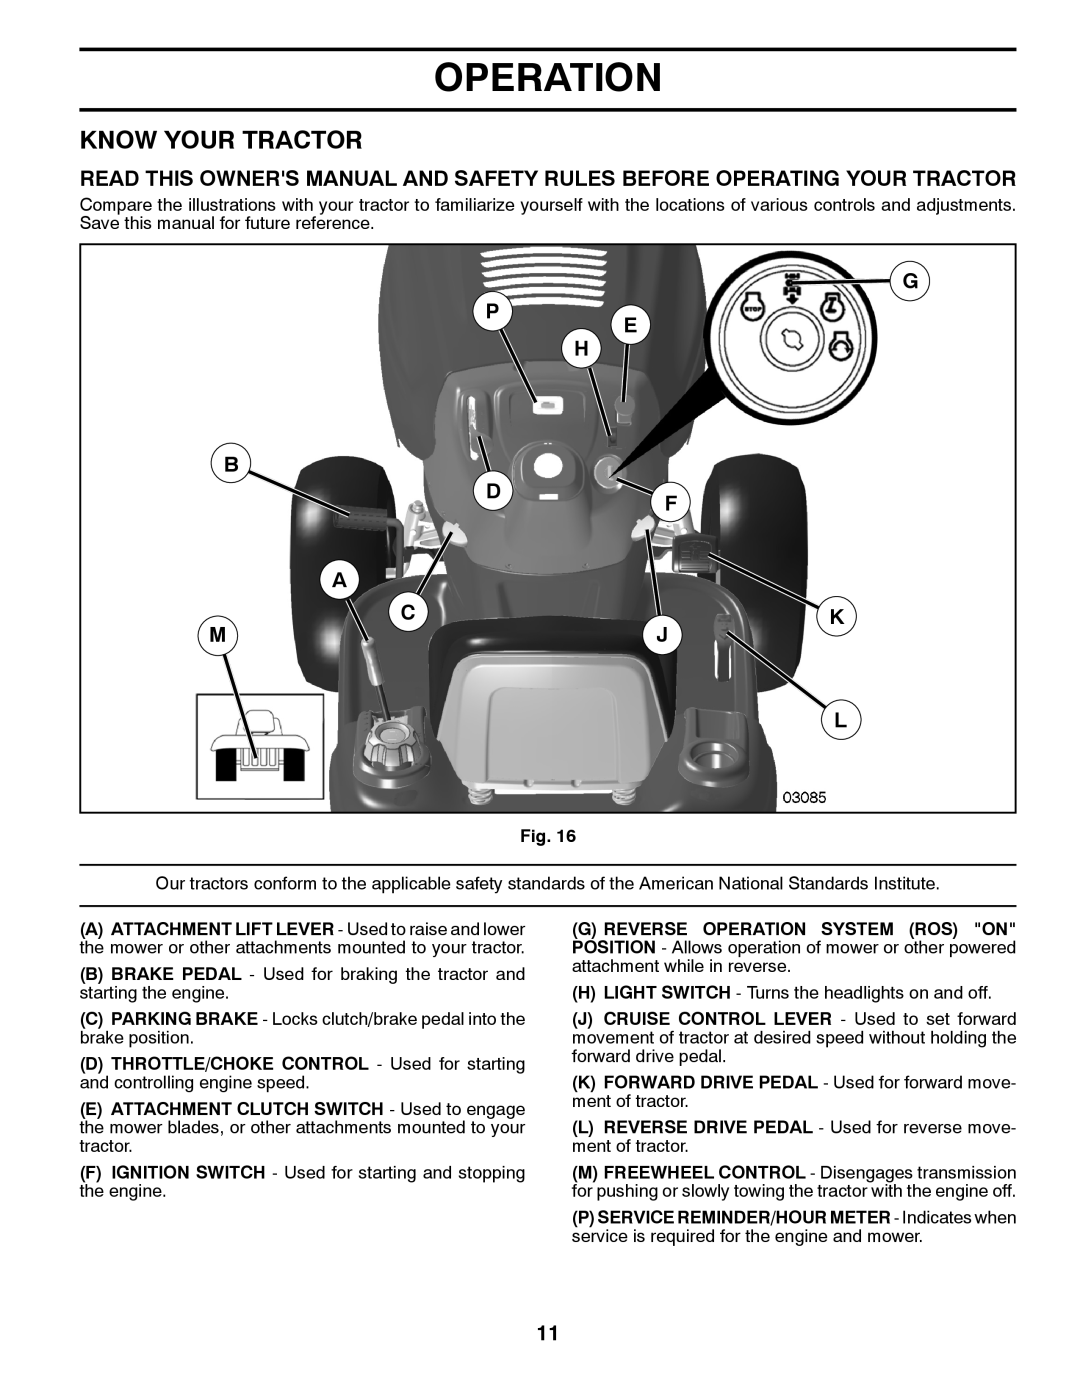 Poulan 96042011001, 532 43 34-32 manual Know Your Tractor, Pe H, Operation 